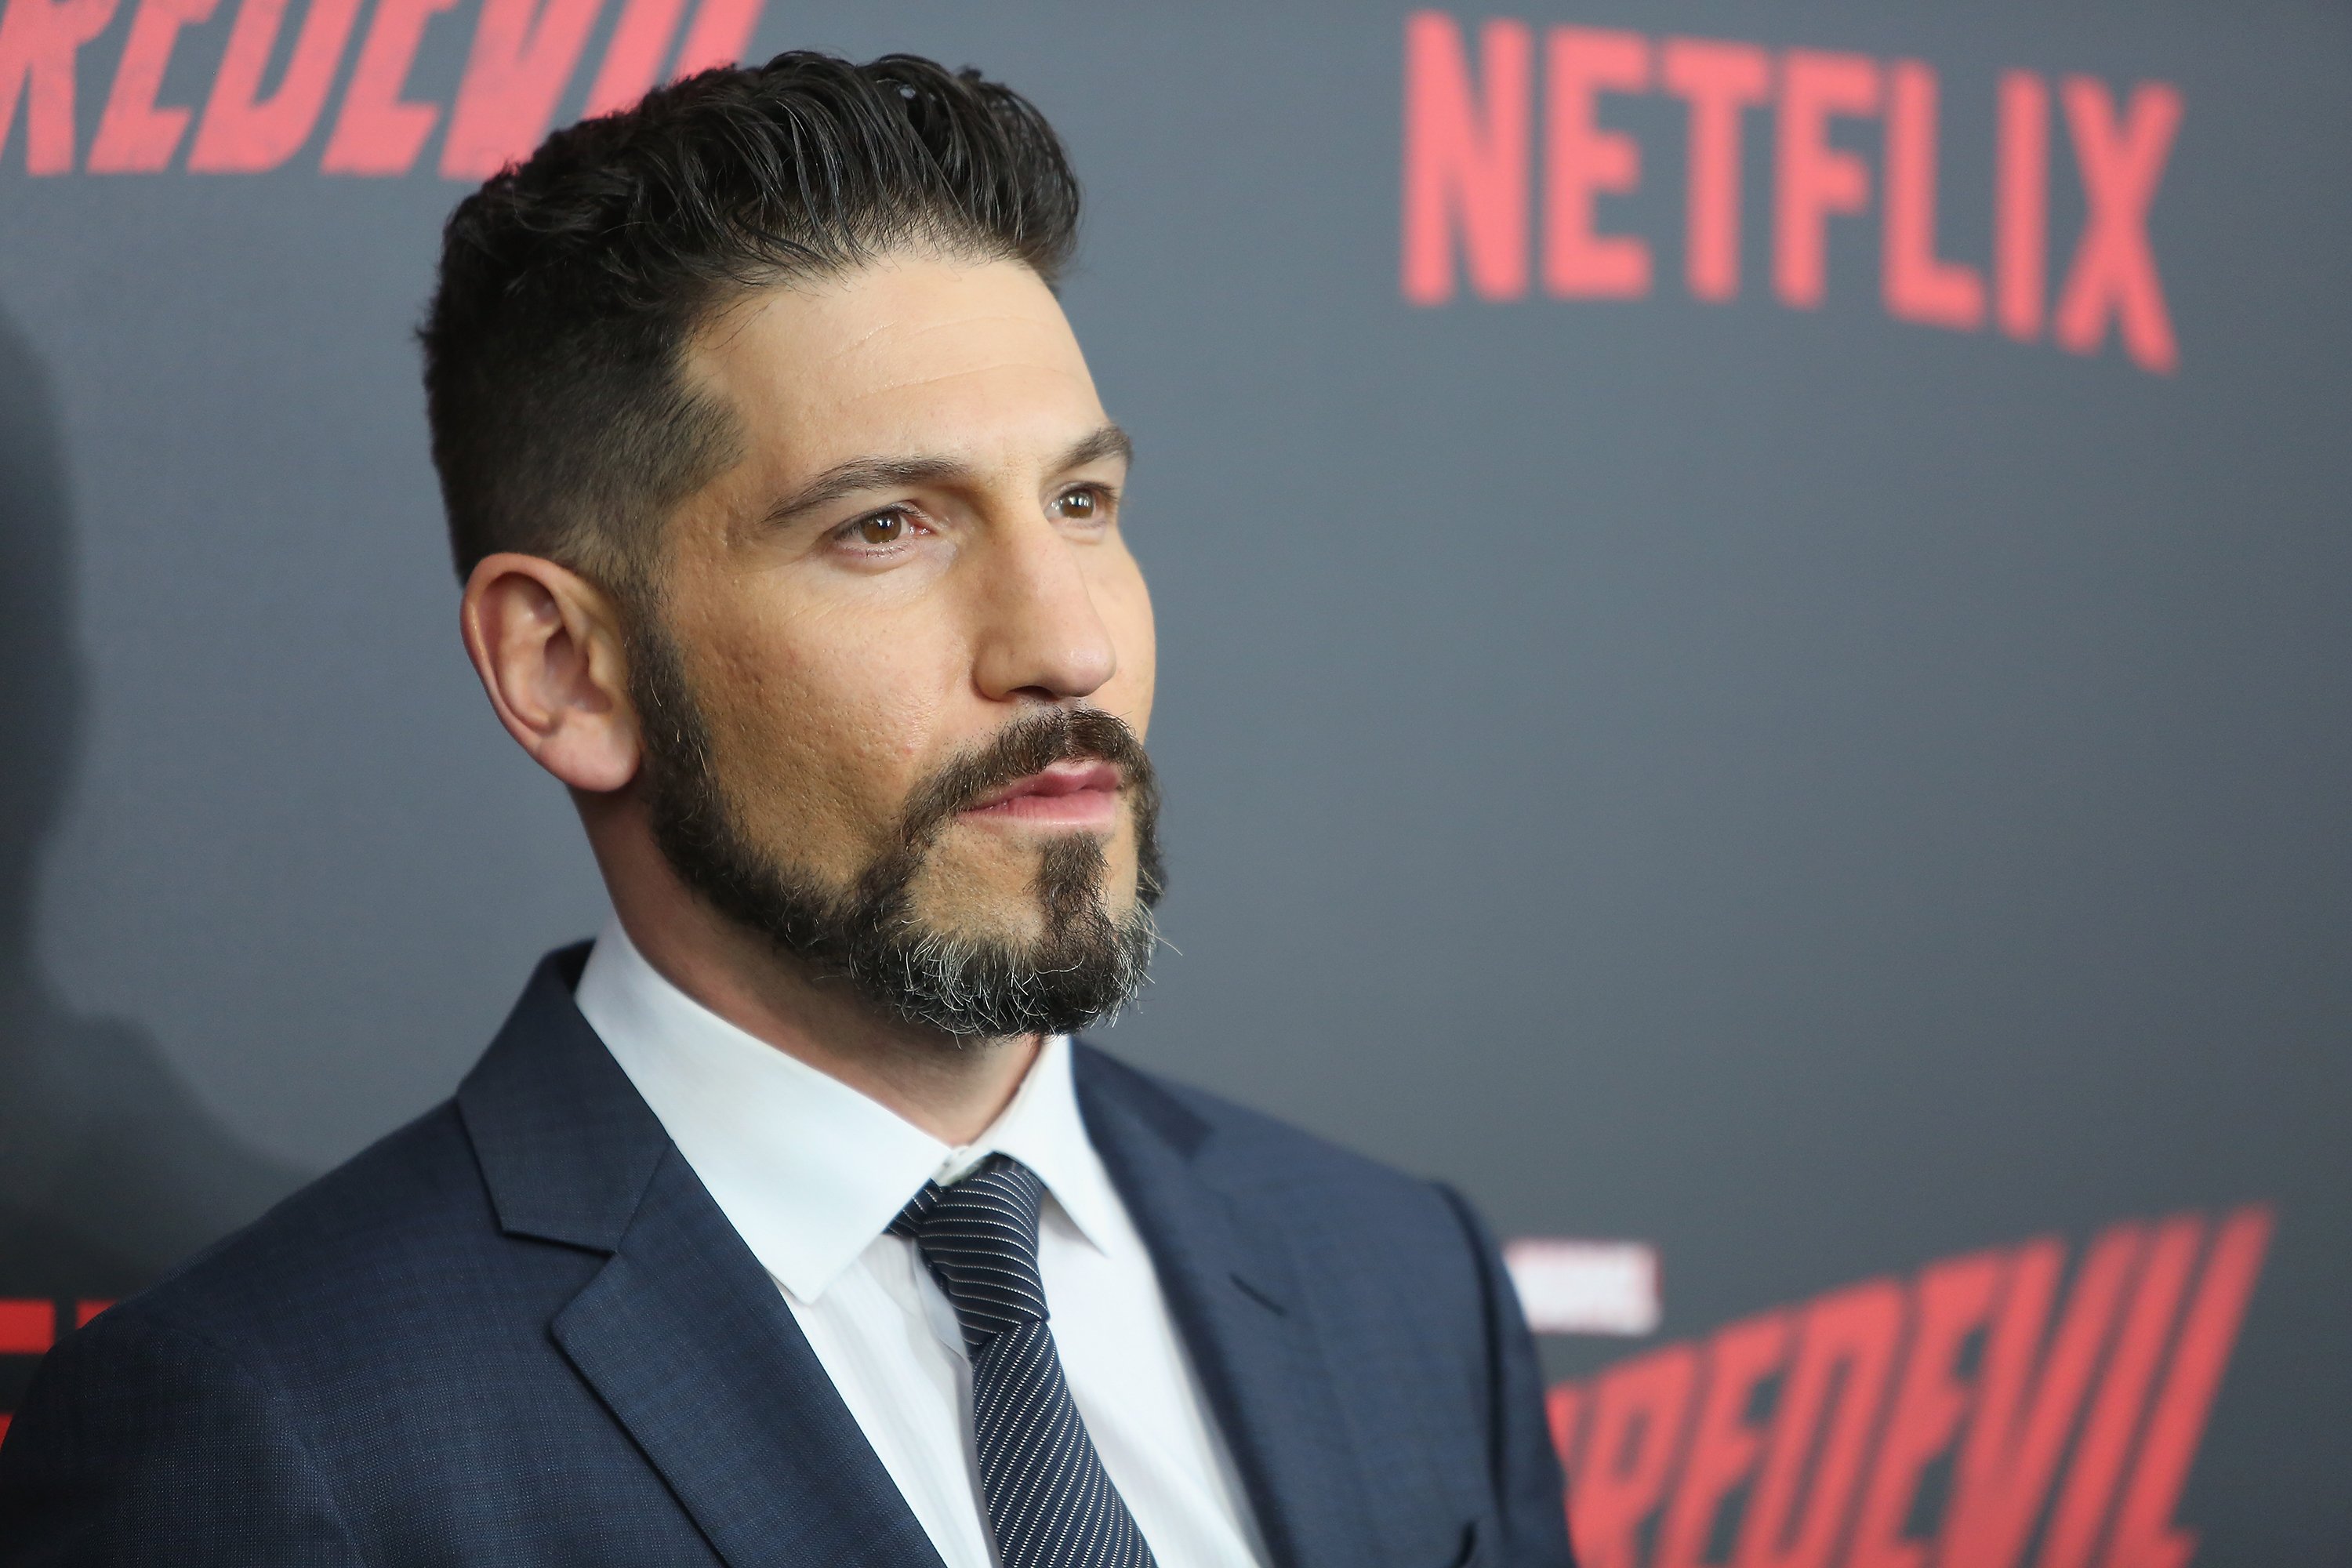 Jon Bernthal, who played the Punisher in the MCU, wears